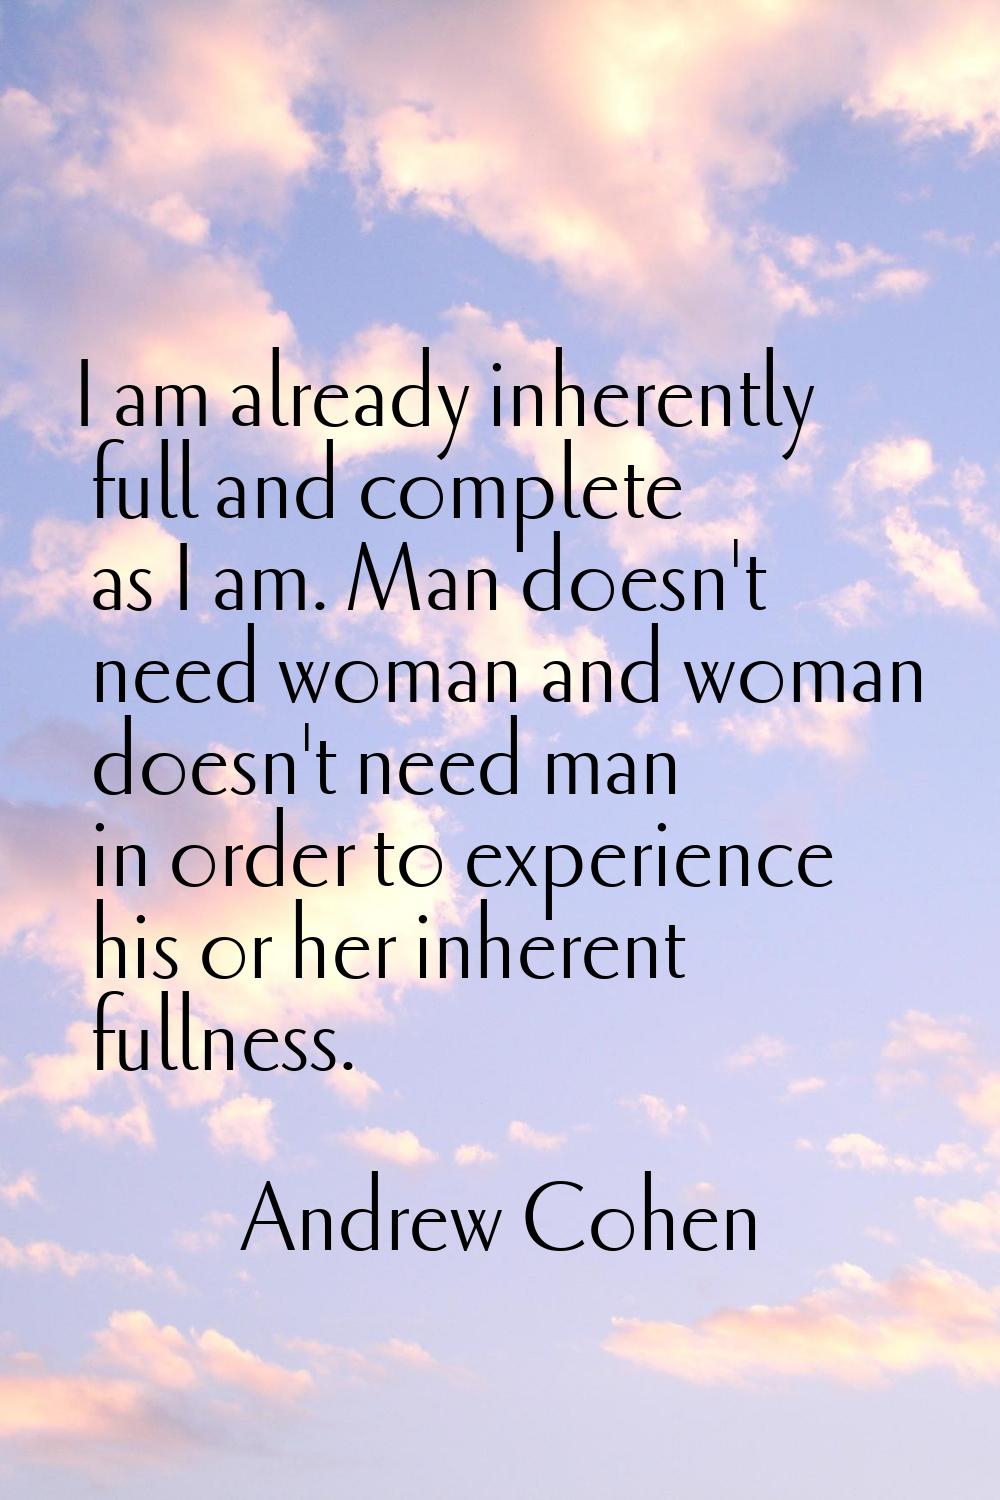 I am already inherently full and complete as I am. Man doesn't need woman and woman doesn't need ma